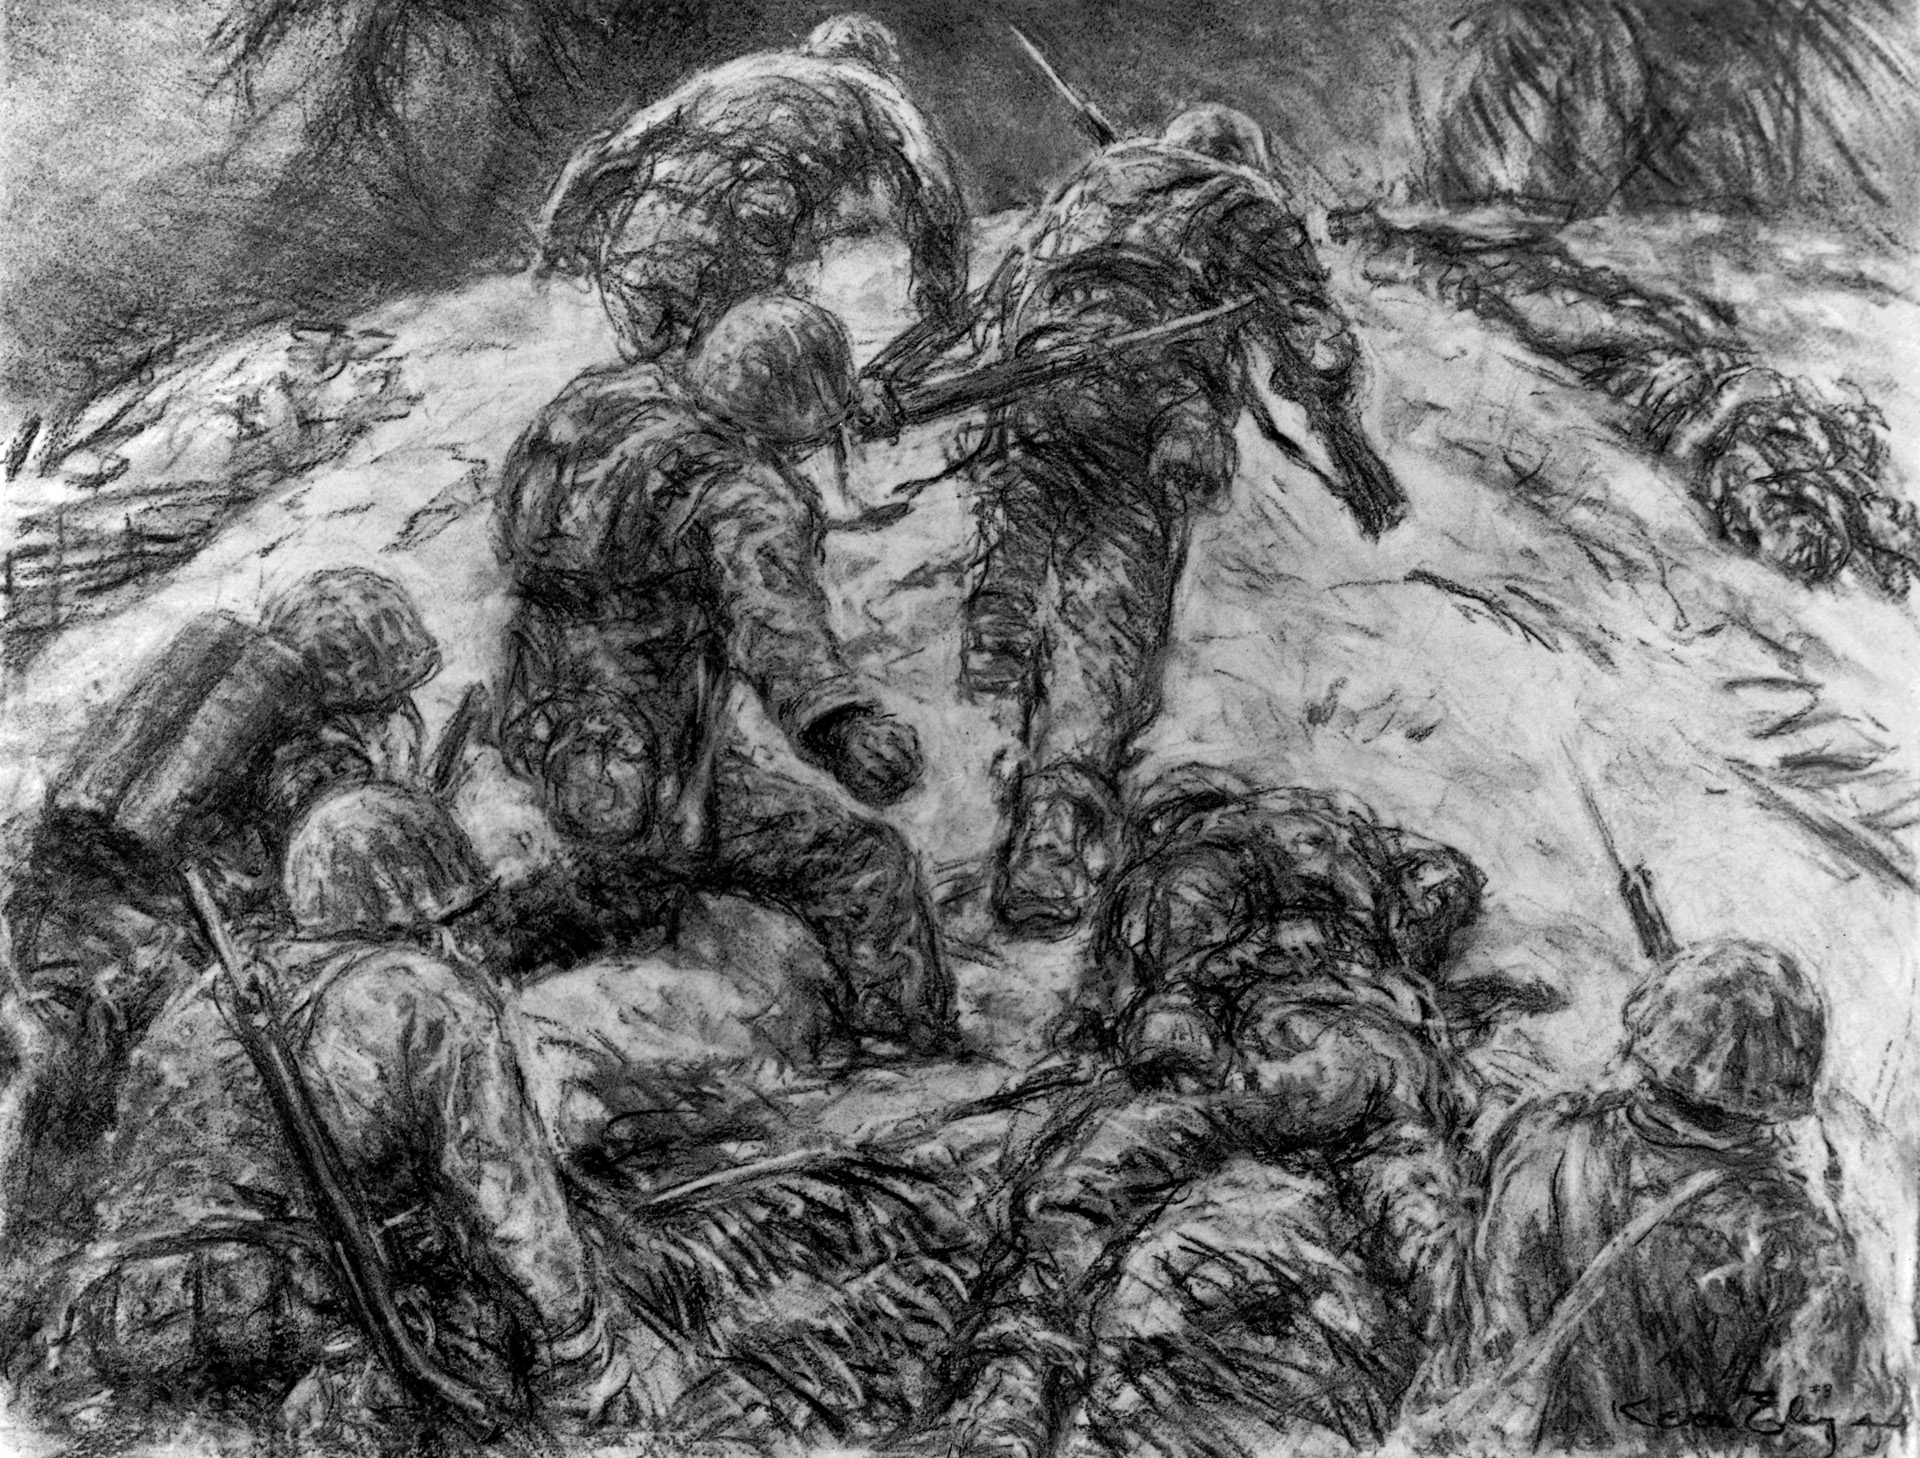 In this haunting charcoal sketch titled Marines Fall Forward, artist Kerr Eby depicts U.S. Marines fighting in the Gilbert Islands against the Japanese. The raid on Makin was an early offensive action that was fraught with risk. Its success is a topic of debate to this day.